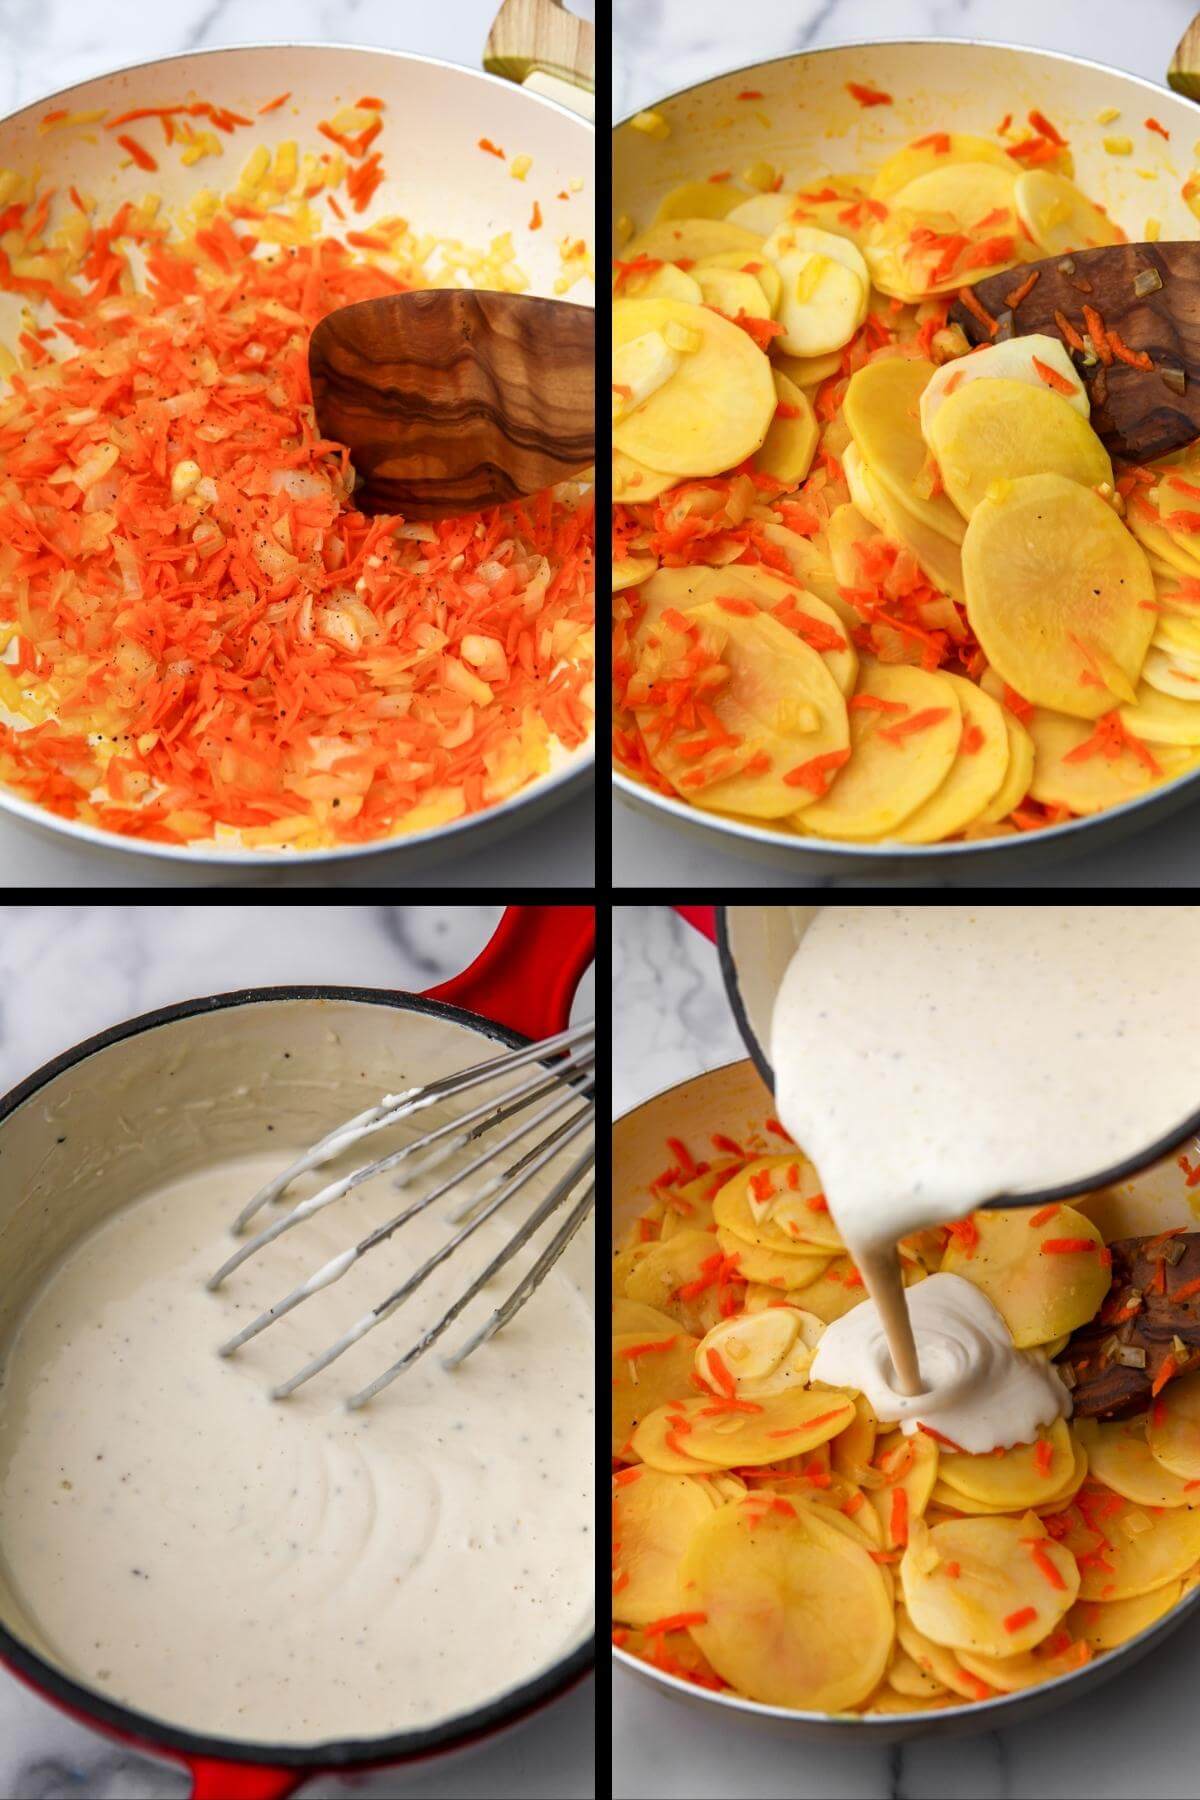 A collage of 4 images showing sauting onions and carrots, adding sliced poatoes, makeing a vegan cream sauce and pouring it over the top of the vegetables.